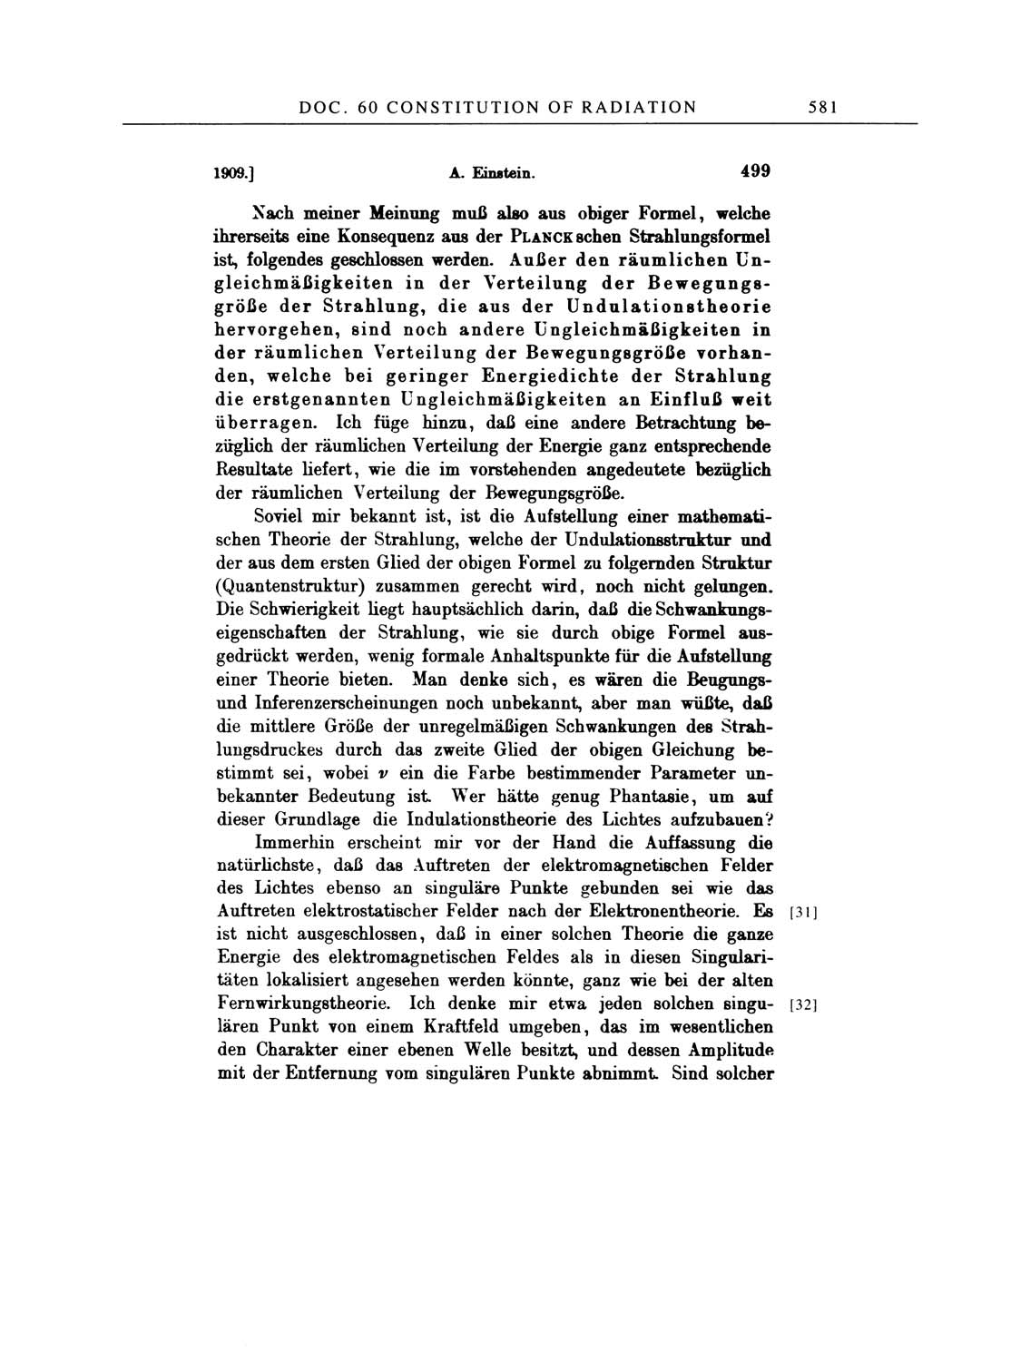 Volume 2: The Swiss Years: Writings, 1900-1909 page 581